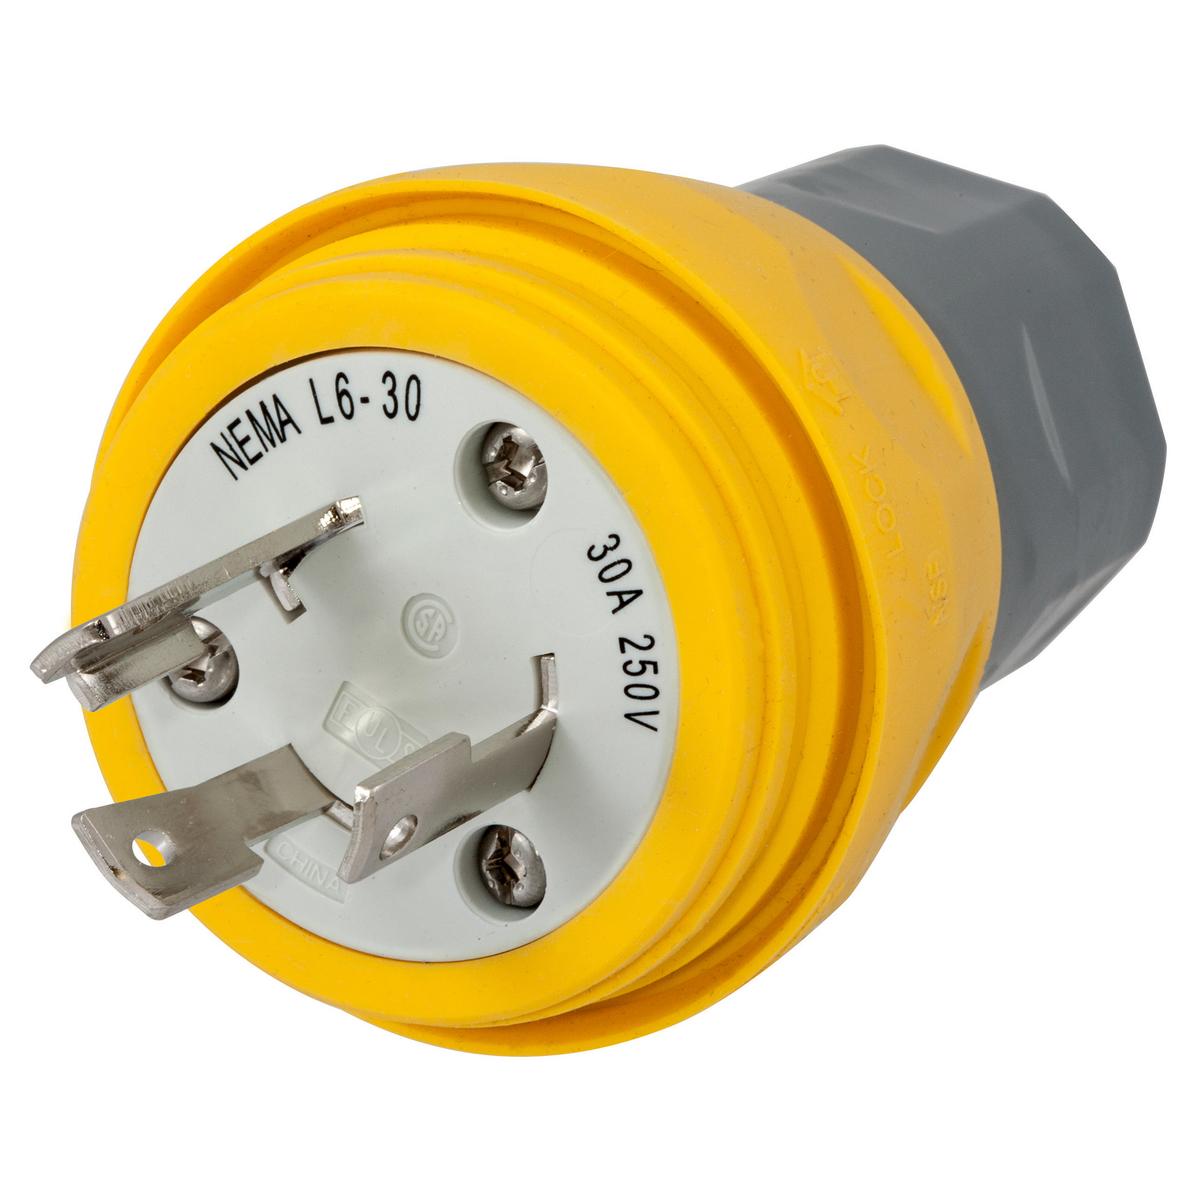 Hubbell HBL28W48 Watertight Devices, Twist-Lock® Plug, 30A, 250V, 2 Pole, 3 Wire, Thermoplastic elastomer, NEMA L6-30P, Yellow  ; Smooth body design minimizes collection points simplifying the wash down process ; Strain relief nut always seals on the body, minimizing debr